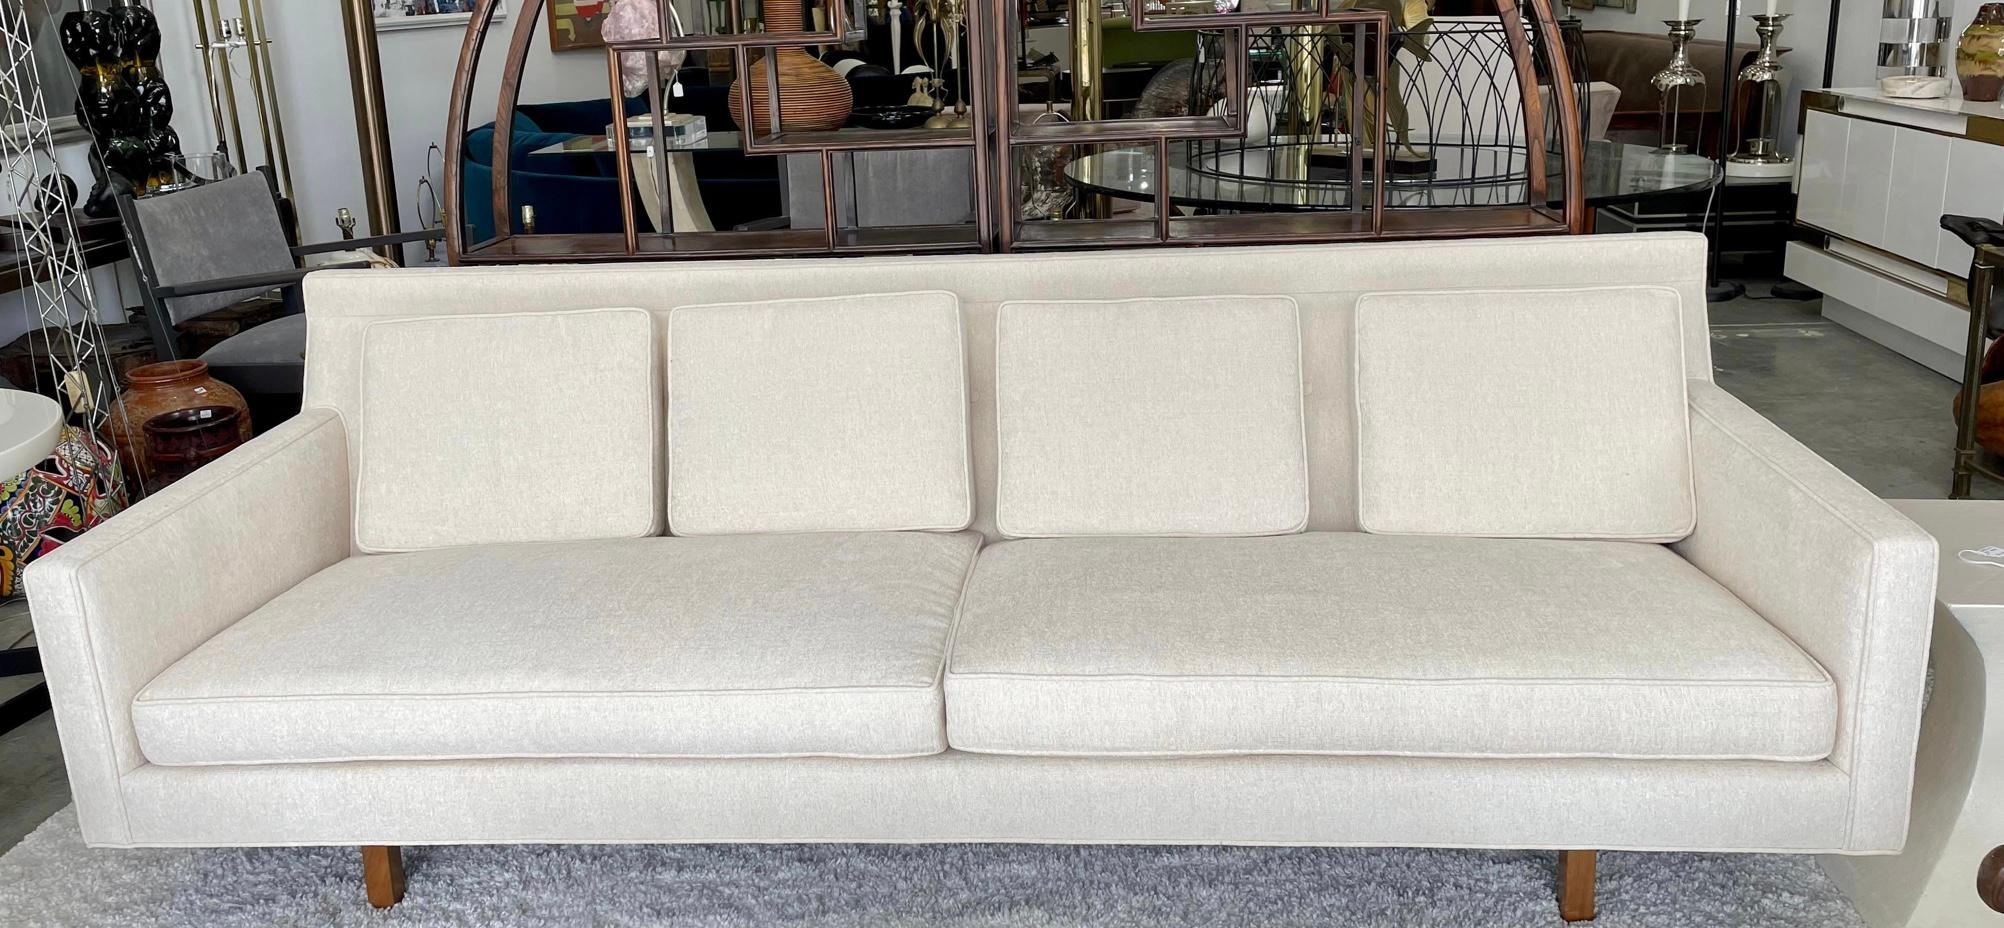 This amazing sofa has nice lines. It’s very comfortable and the backside is as nice as the front.